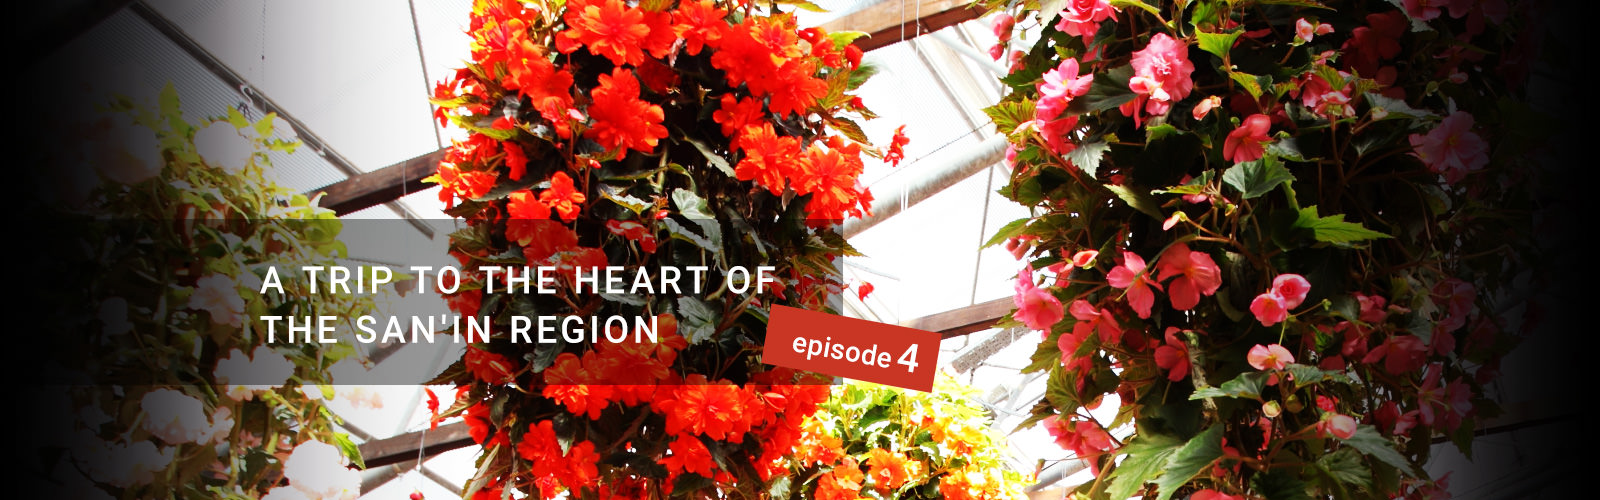 Story - Episode4 | A TRIP TO THE HEART OF THE SAN'IN REGION